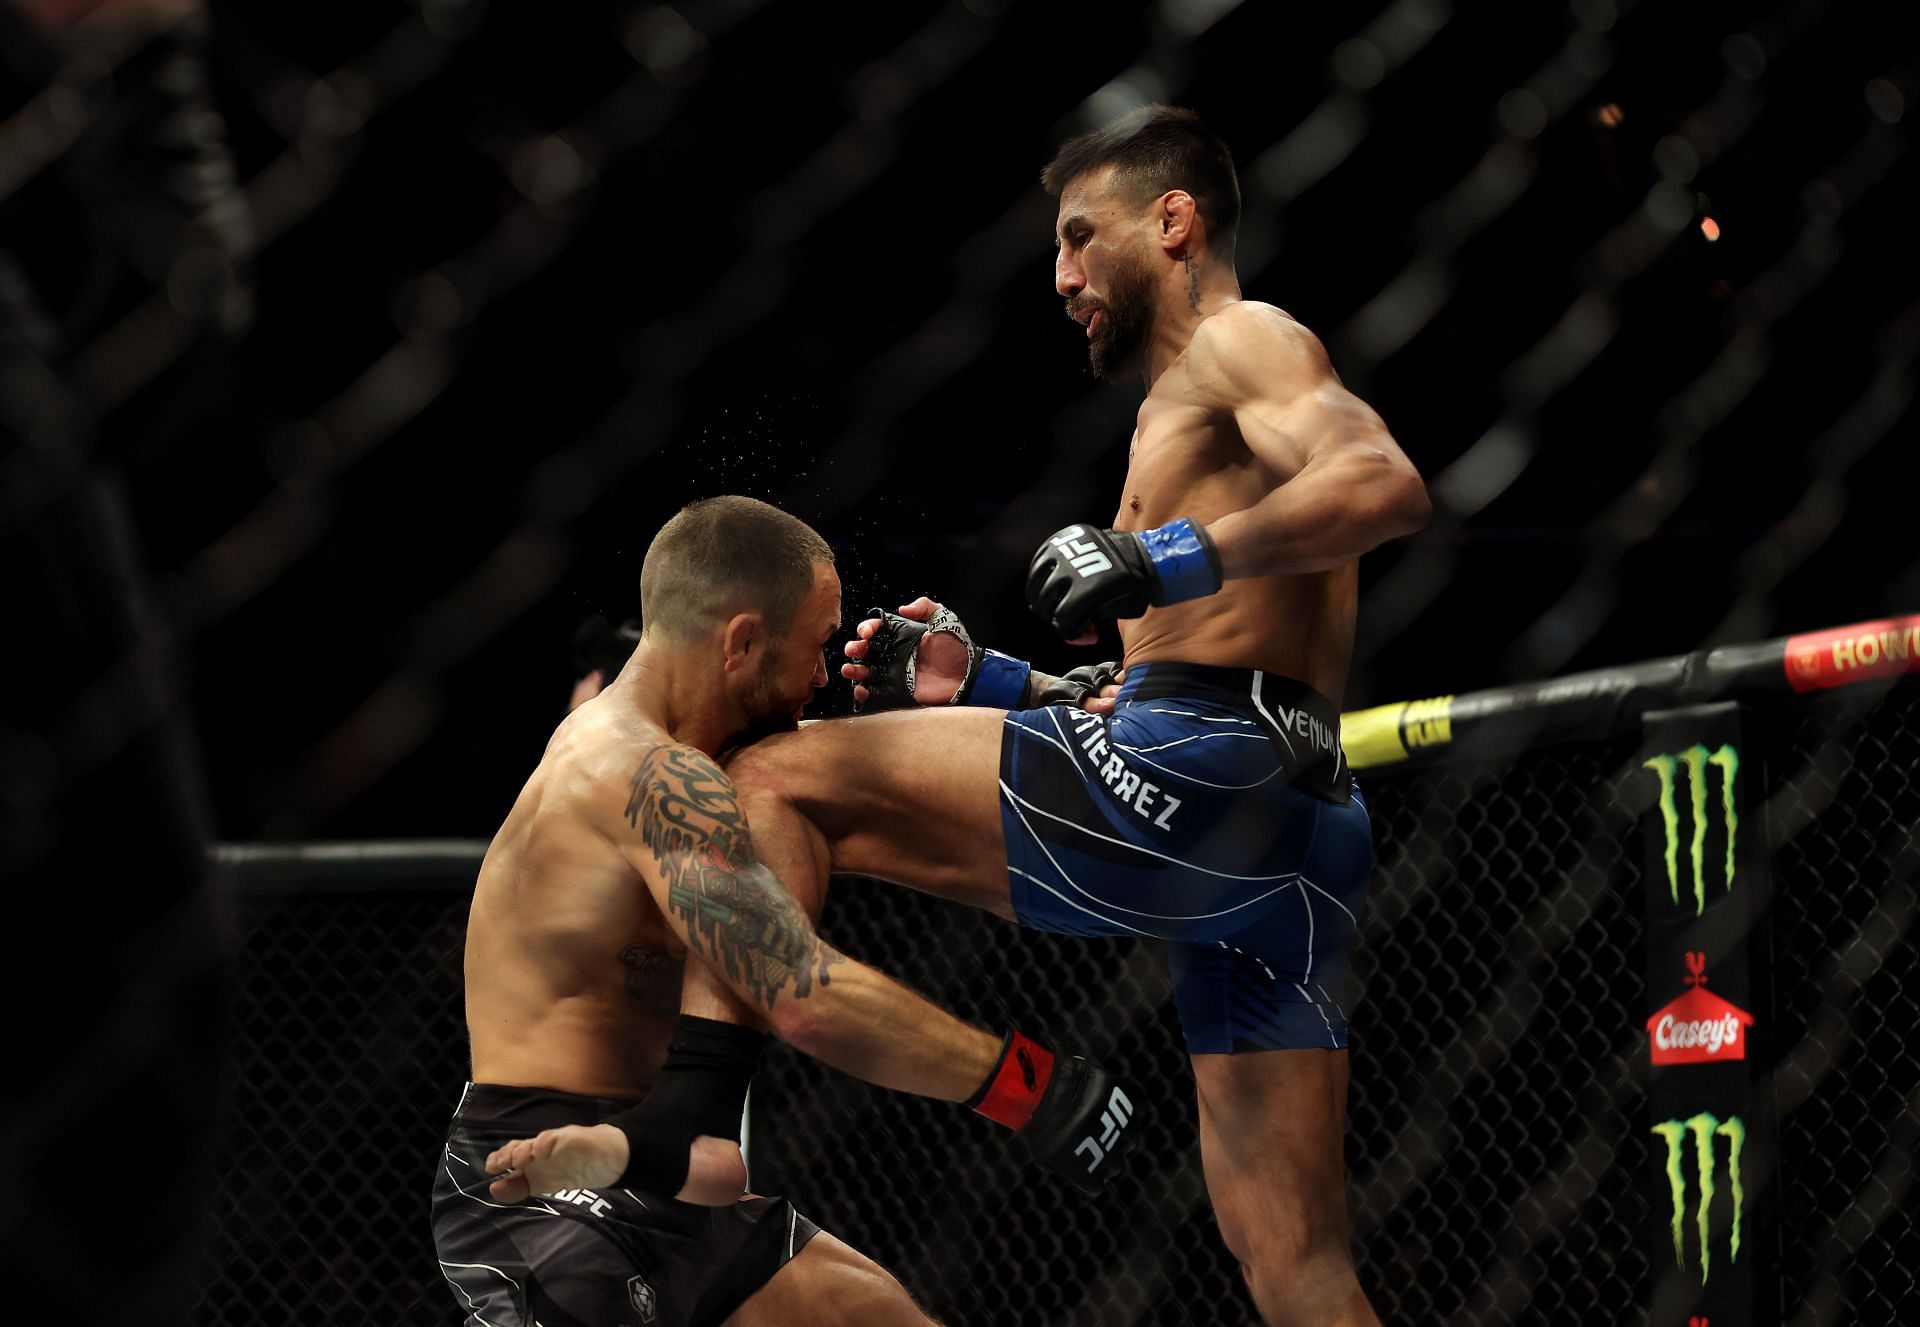 Chris Gutierrez may have a lot of momentum after ending Frankie Edgar's career